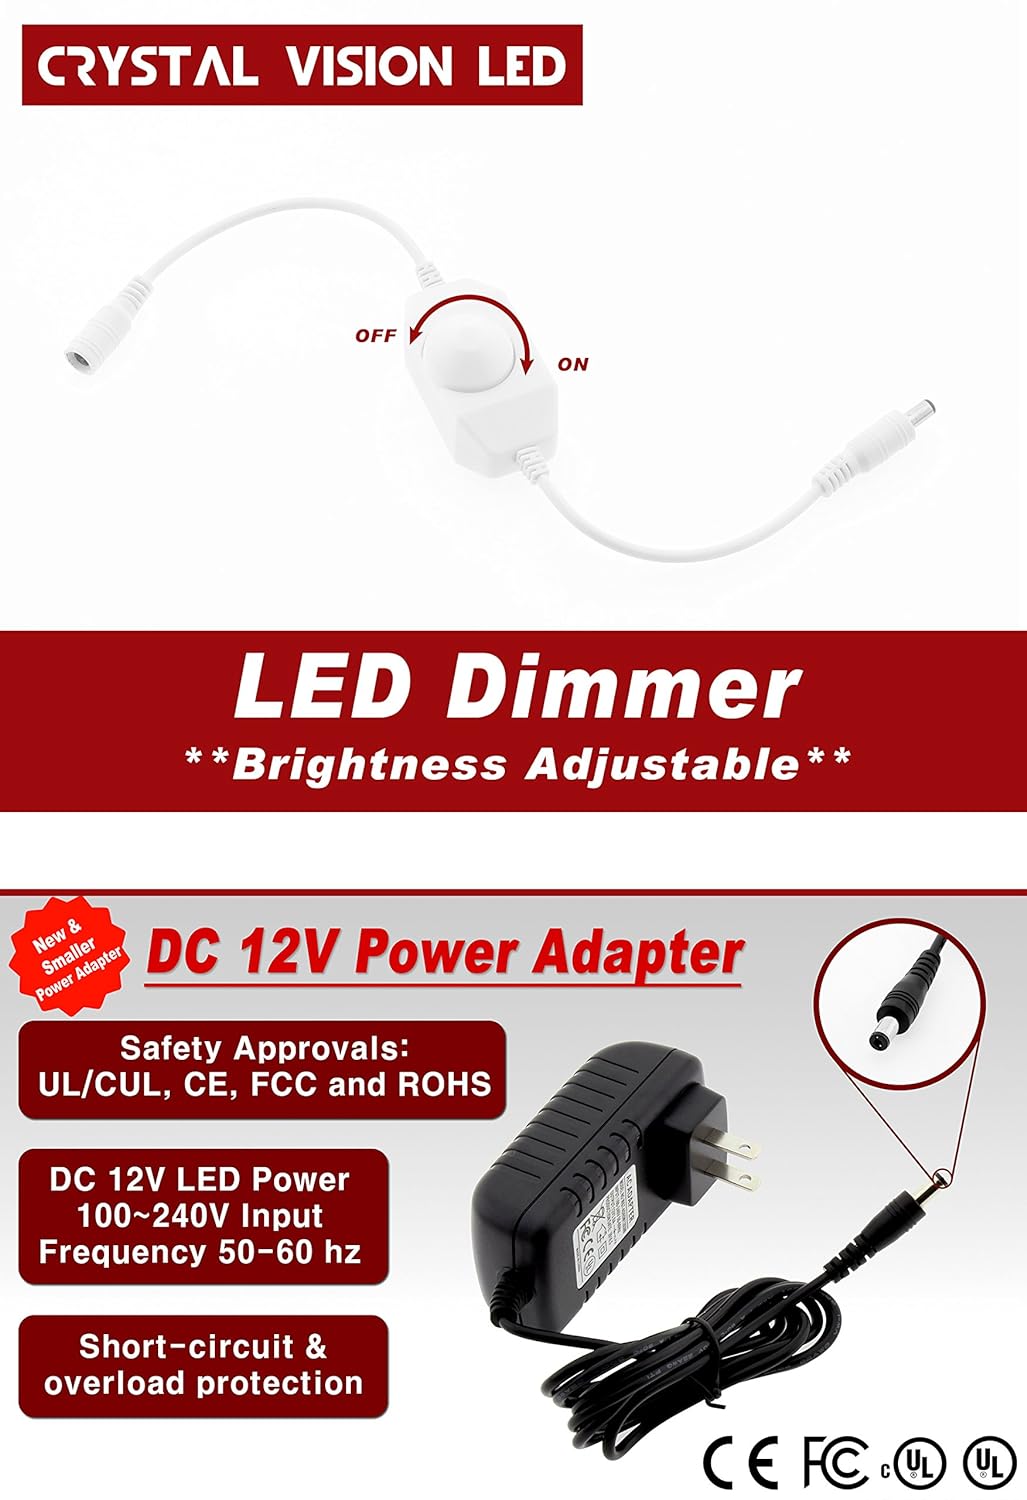 The image shows Crystal Vision's LED dimmer switch for their lighting products. It features an on/off toggle and is labeled as having adjustable brightness. Below, a DC 12V power adapter is displayed, noting its compact size and safety approvals (UL/CUL, CE, FCC, and ROHS). Key specifications include a 100-240V input and frequency of 50-60 Hz, as well as short-circuit and overload protection. The overall design indicates a focus on functionality and safety.